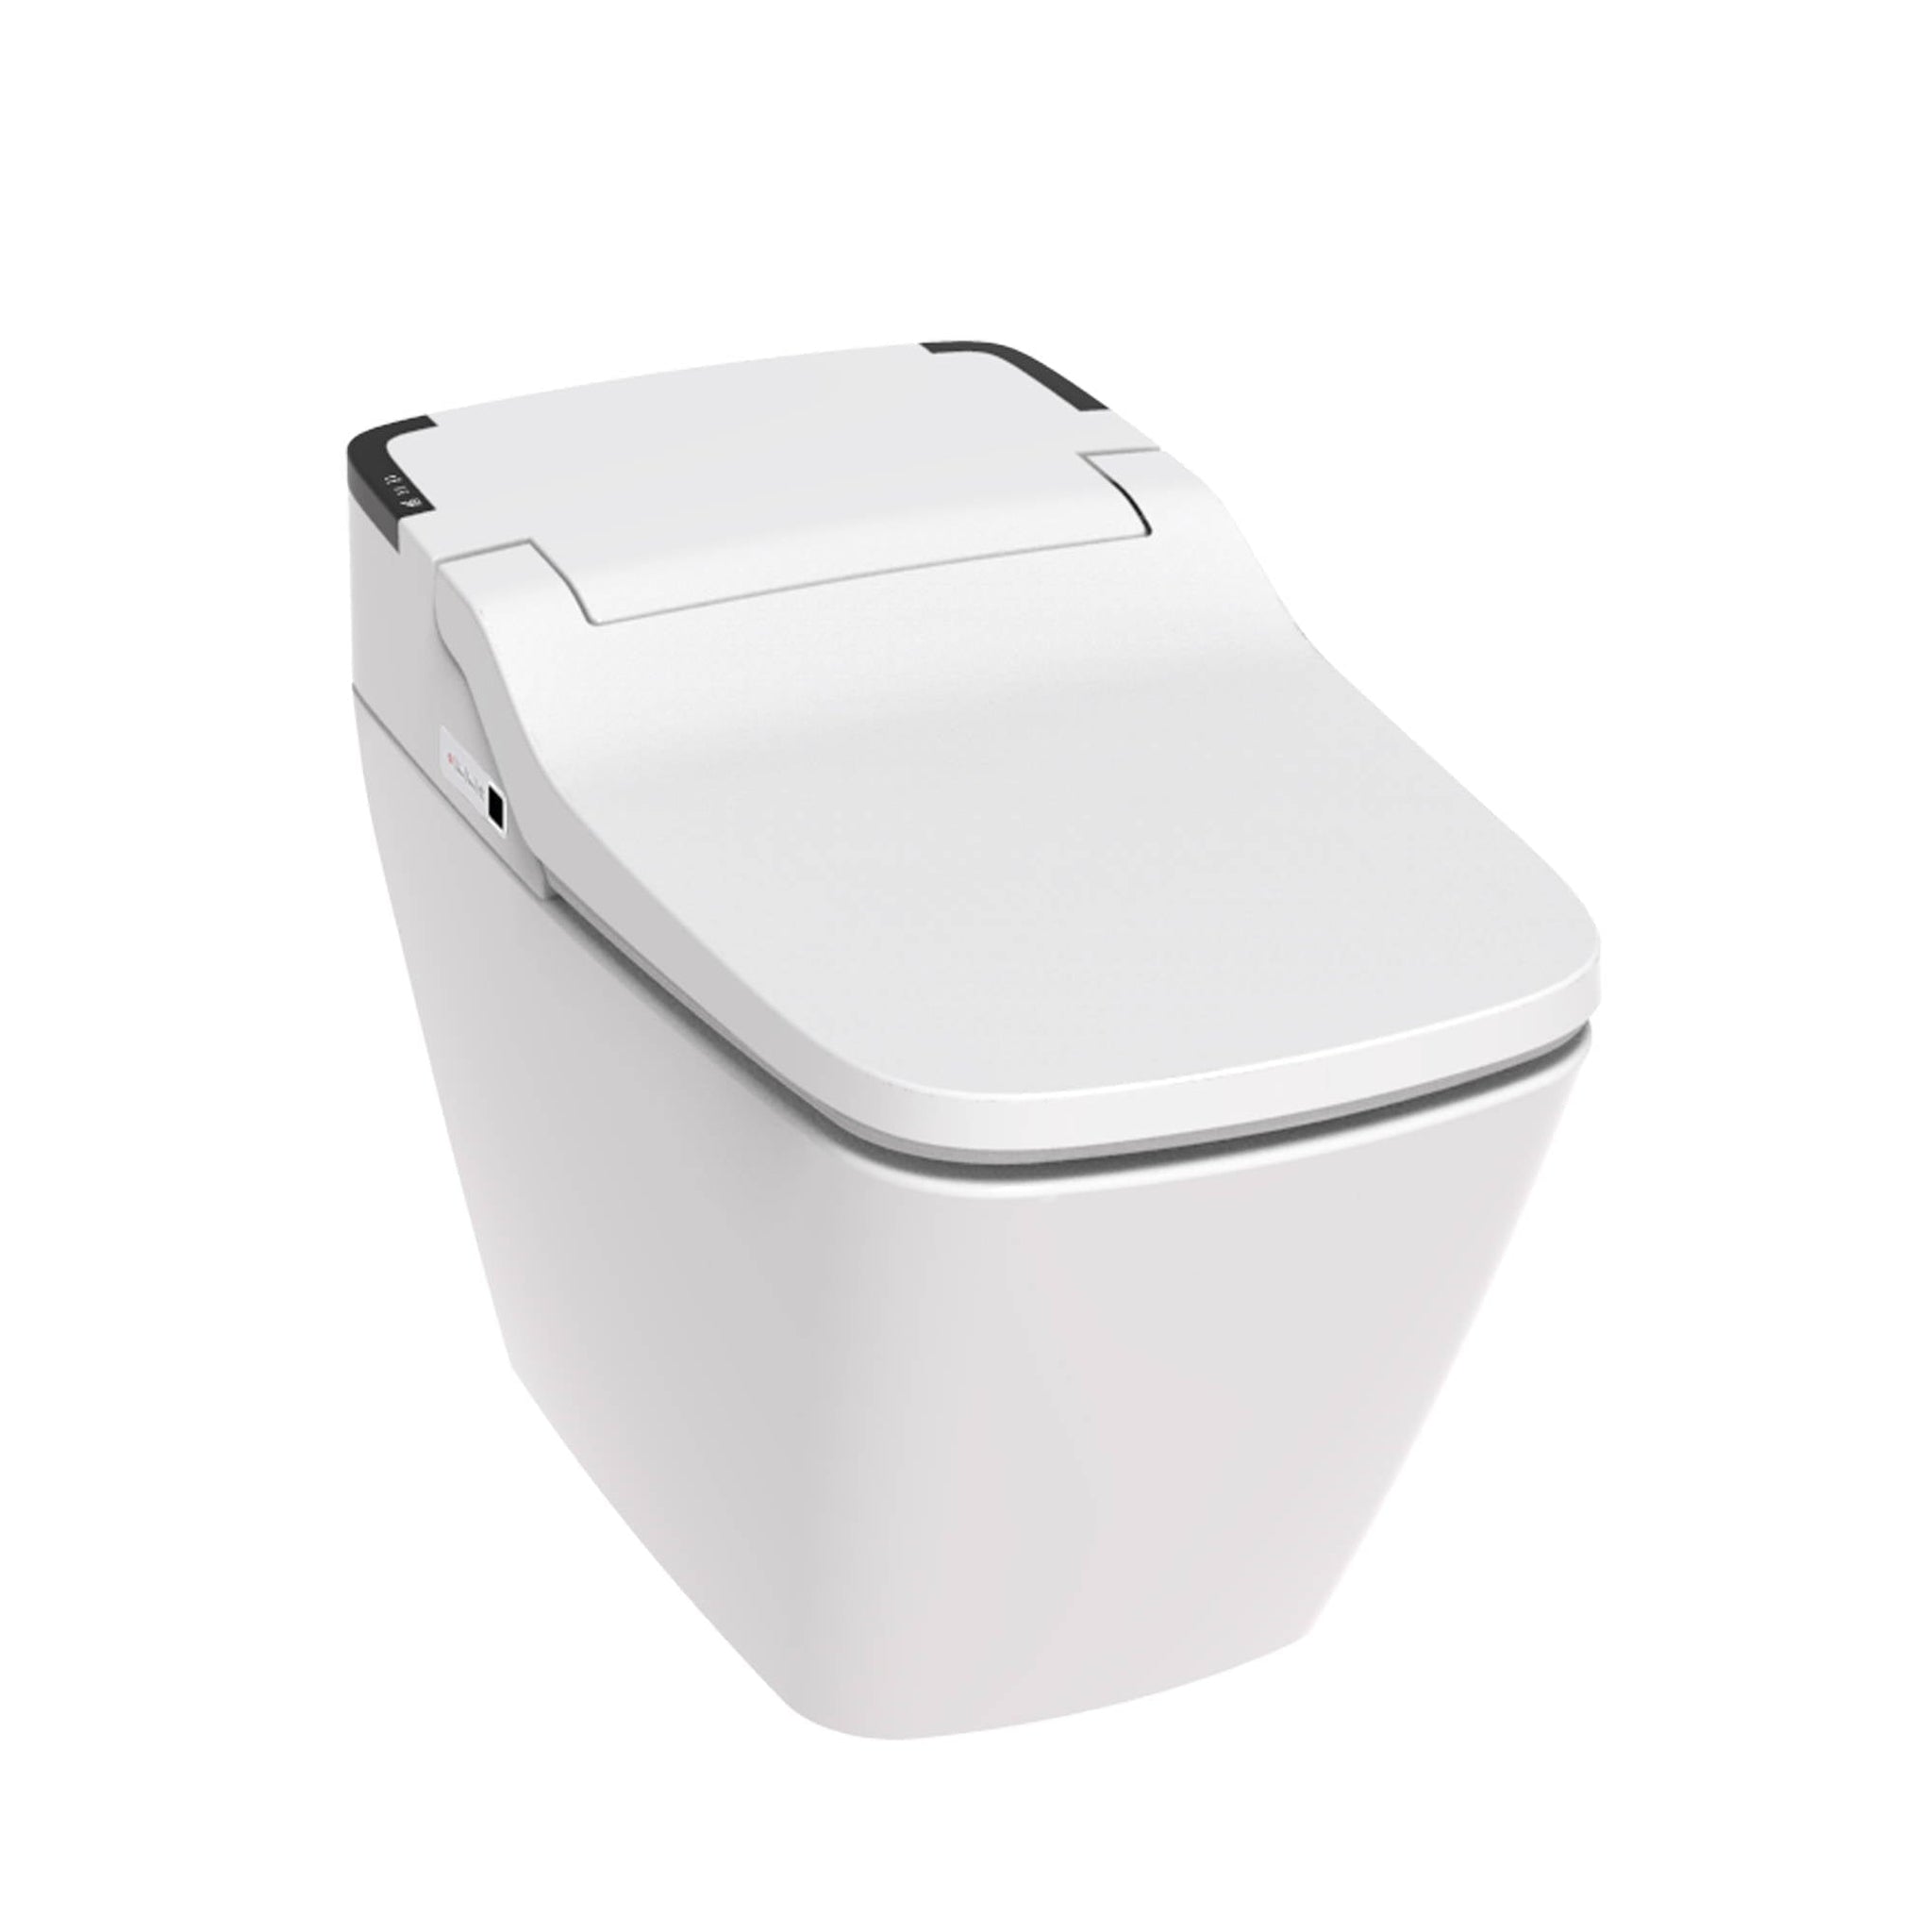 VOVO, VOVO Stylement TCB-090SA Electric Integrated Smart Bidet Toilet  With Auto Open and Close Lid, Auto Flush, UV LED Sterilization, Heated Seat, Warm Dry and Water and Remote Control